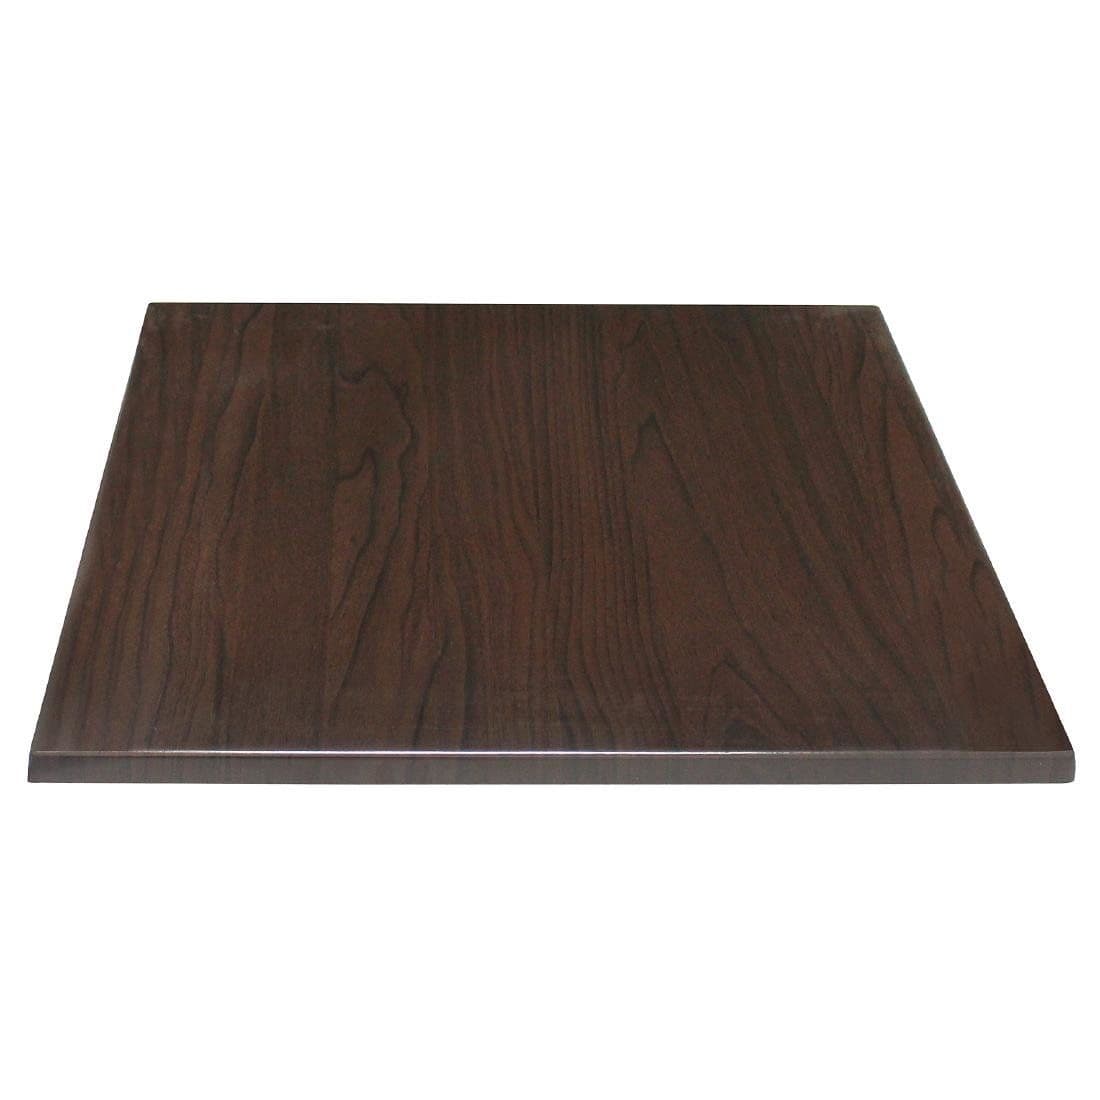 GG639 Bolero Pre-drilled Square Table Top Dark Brown 700mm JD Catering Equipment Solutions Ltd